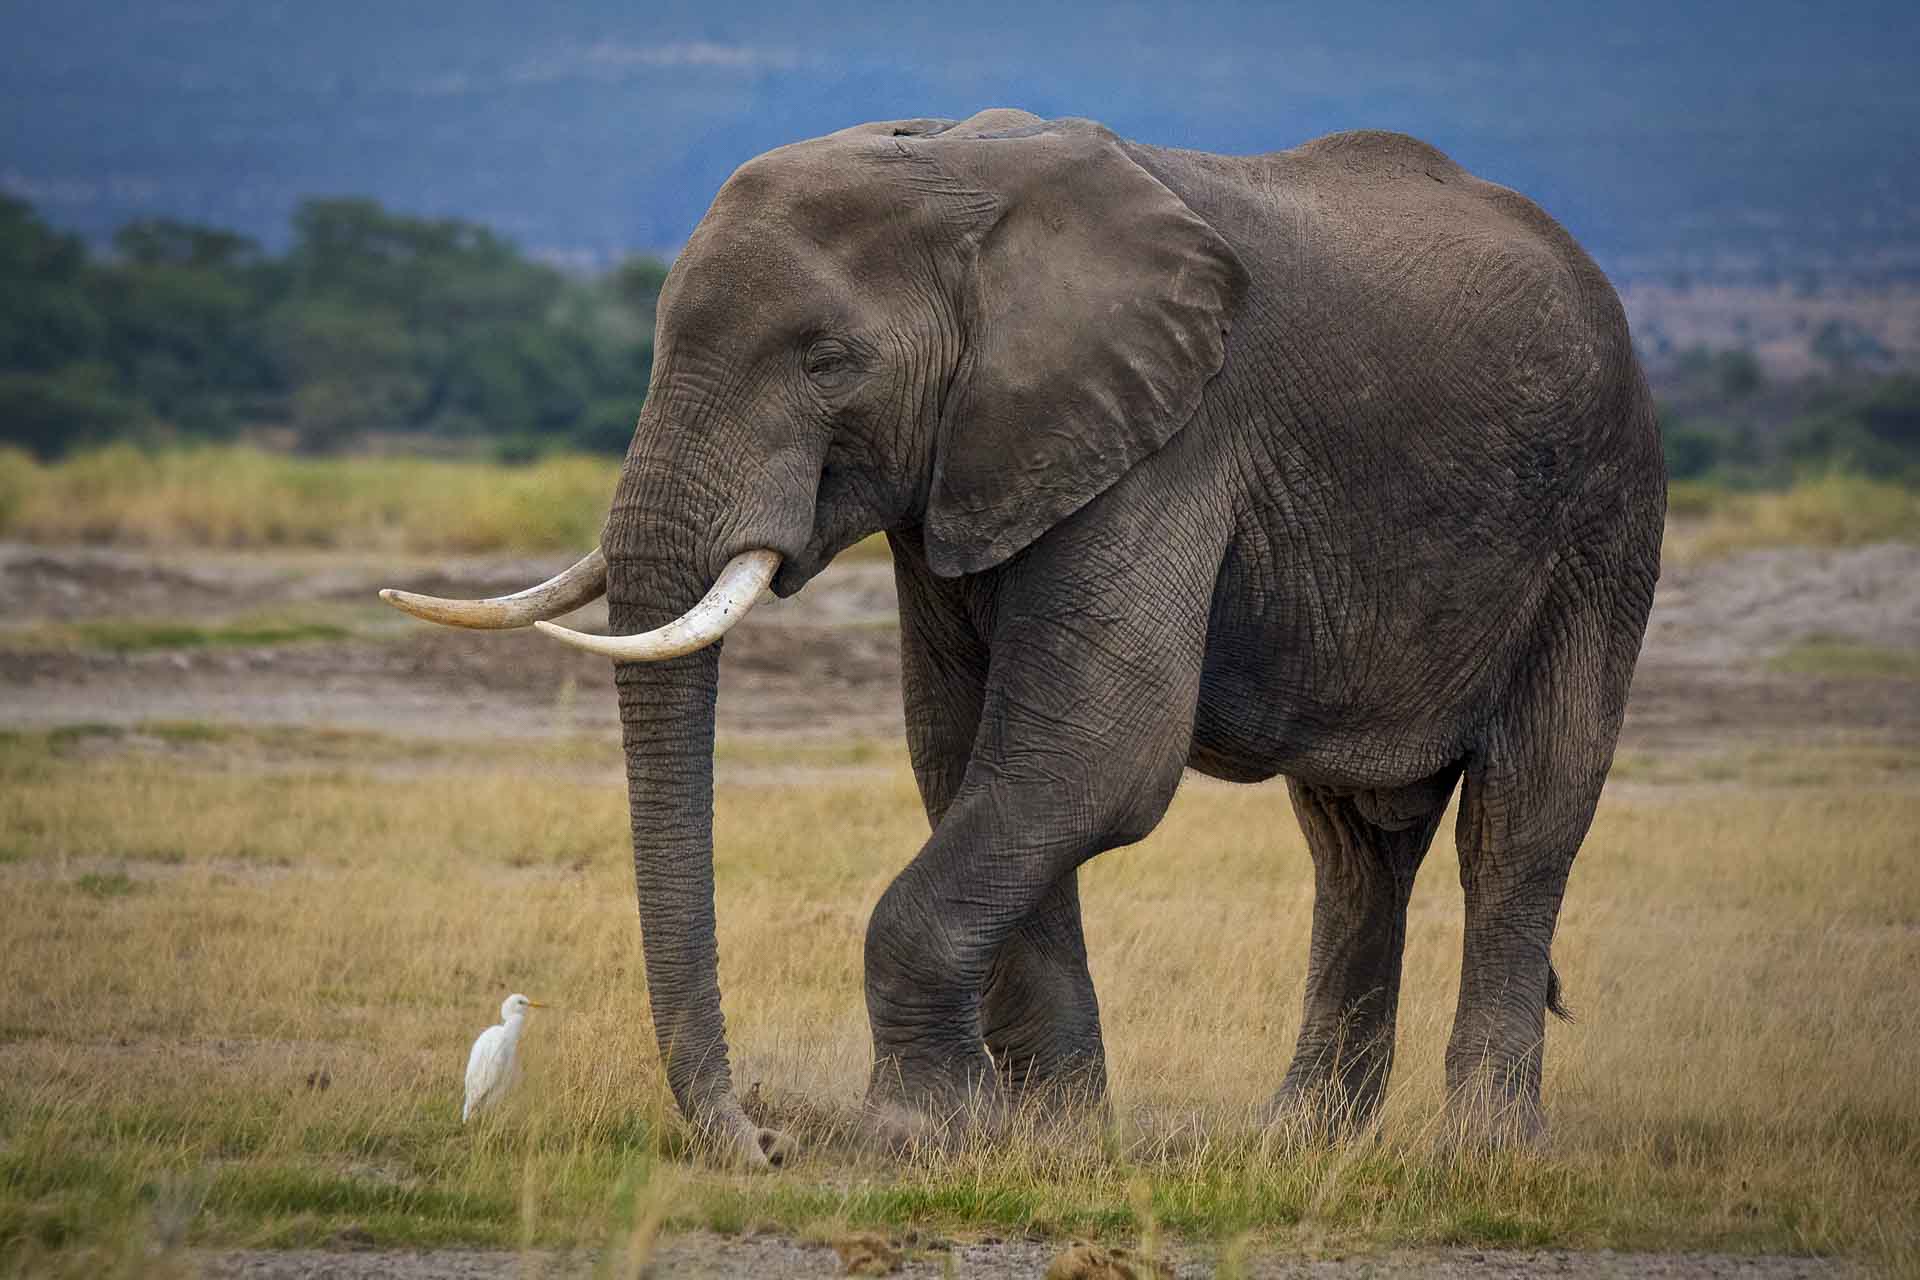 An elephant in Kenya – the country that inspired Dr. Delphine Malleret King’s journey.